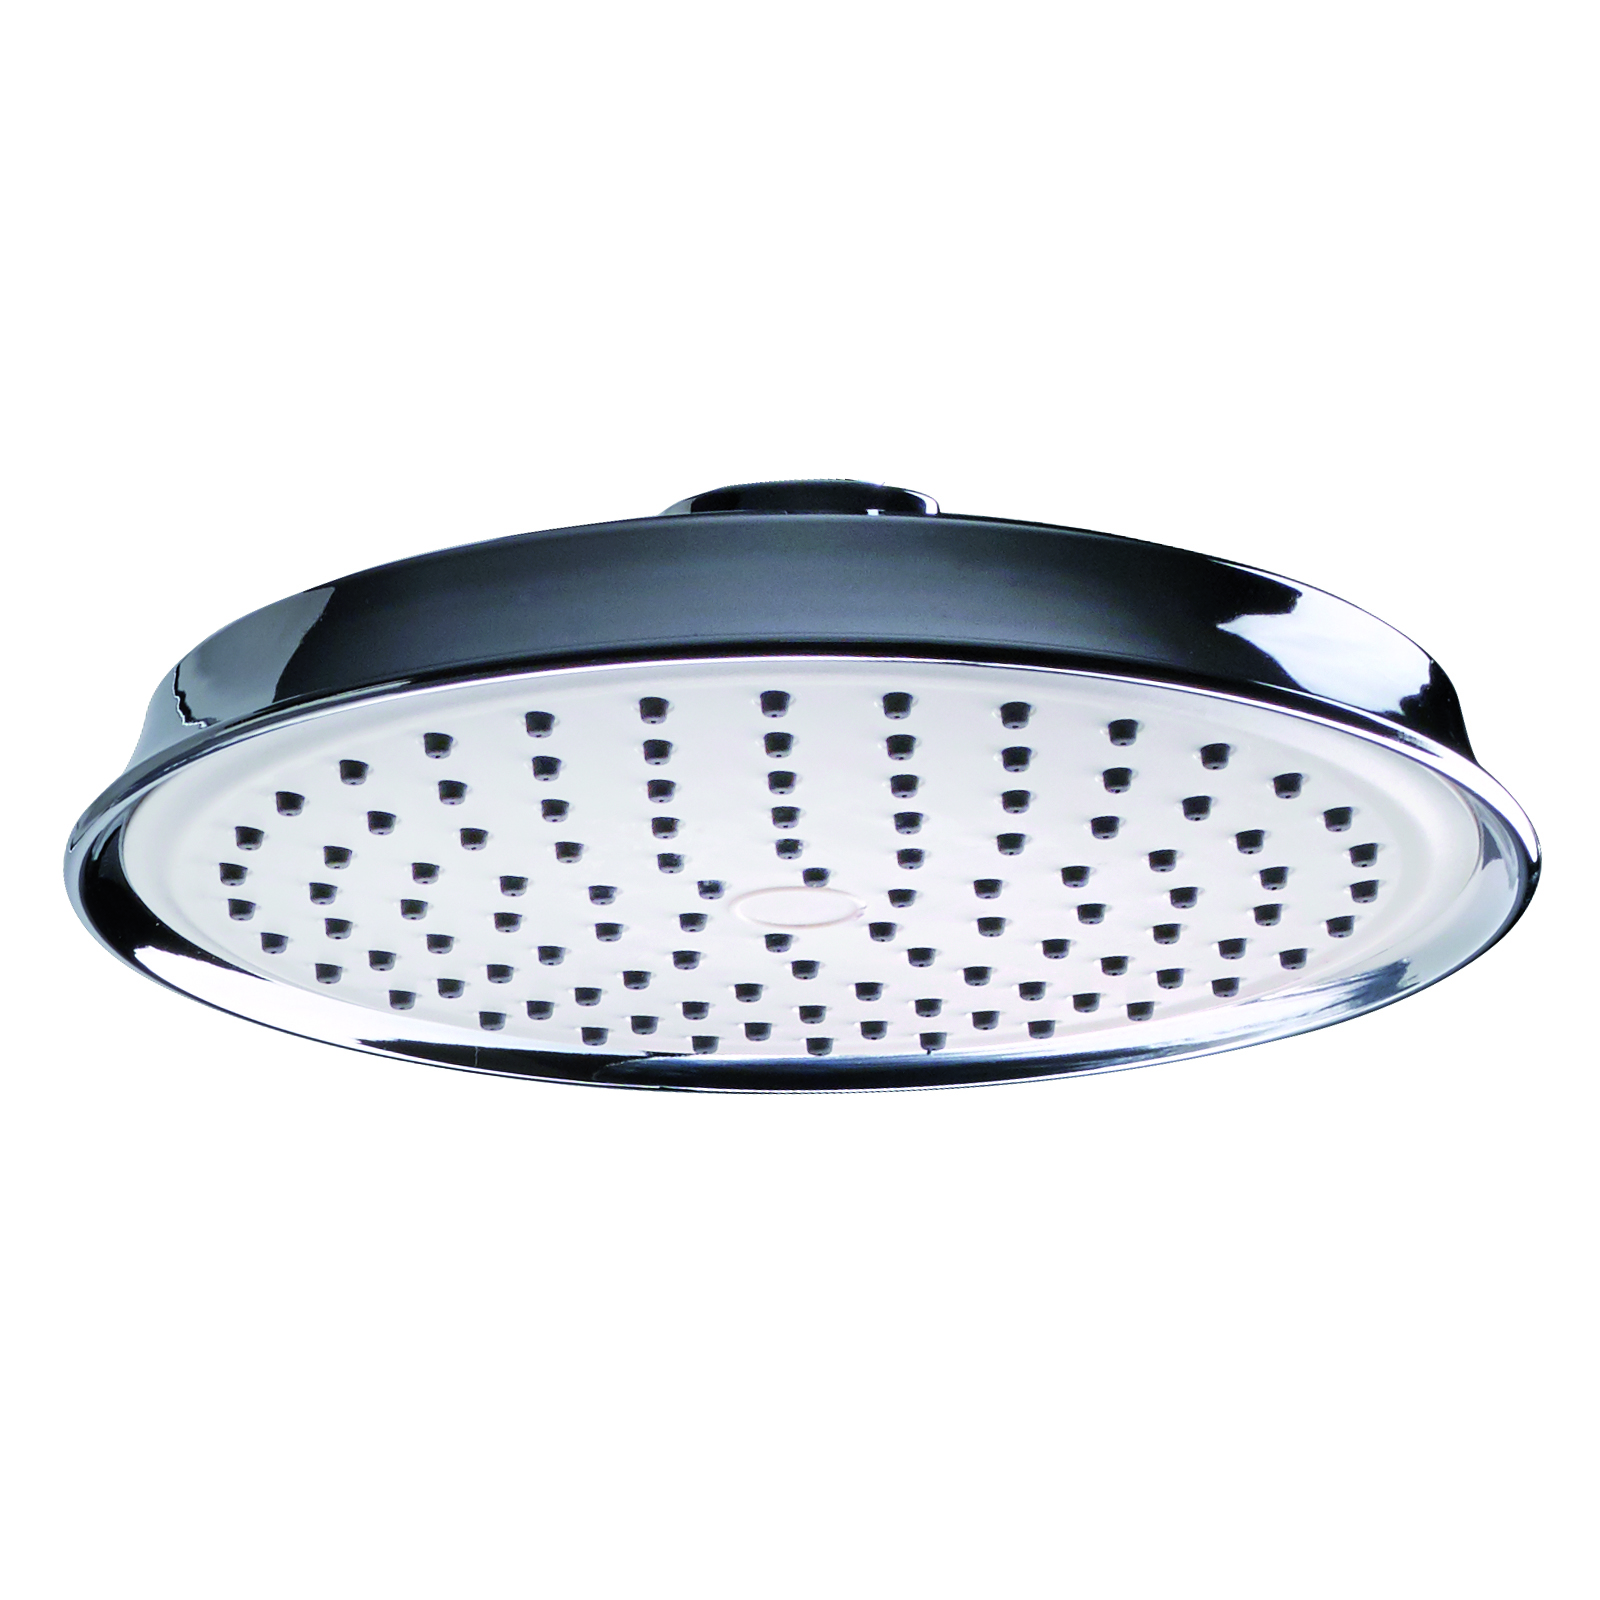 ABS shower head Ø 24 cm with anti-lime picots